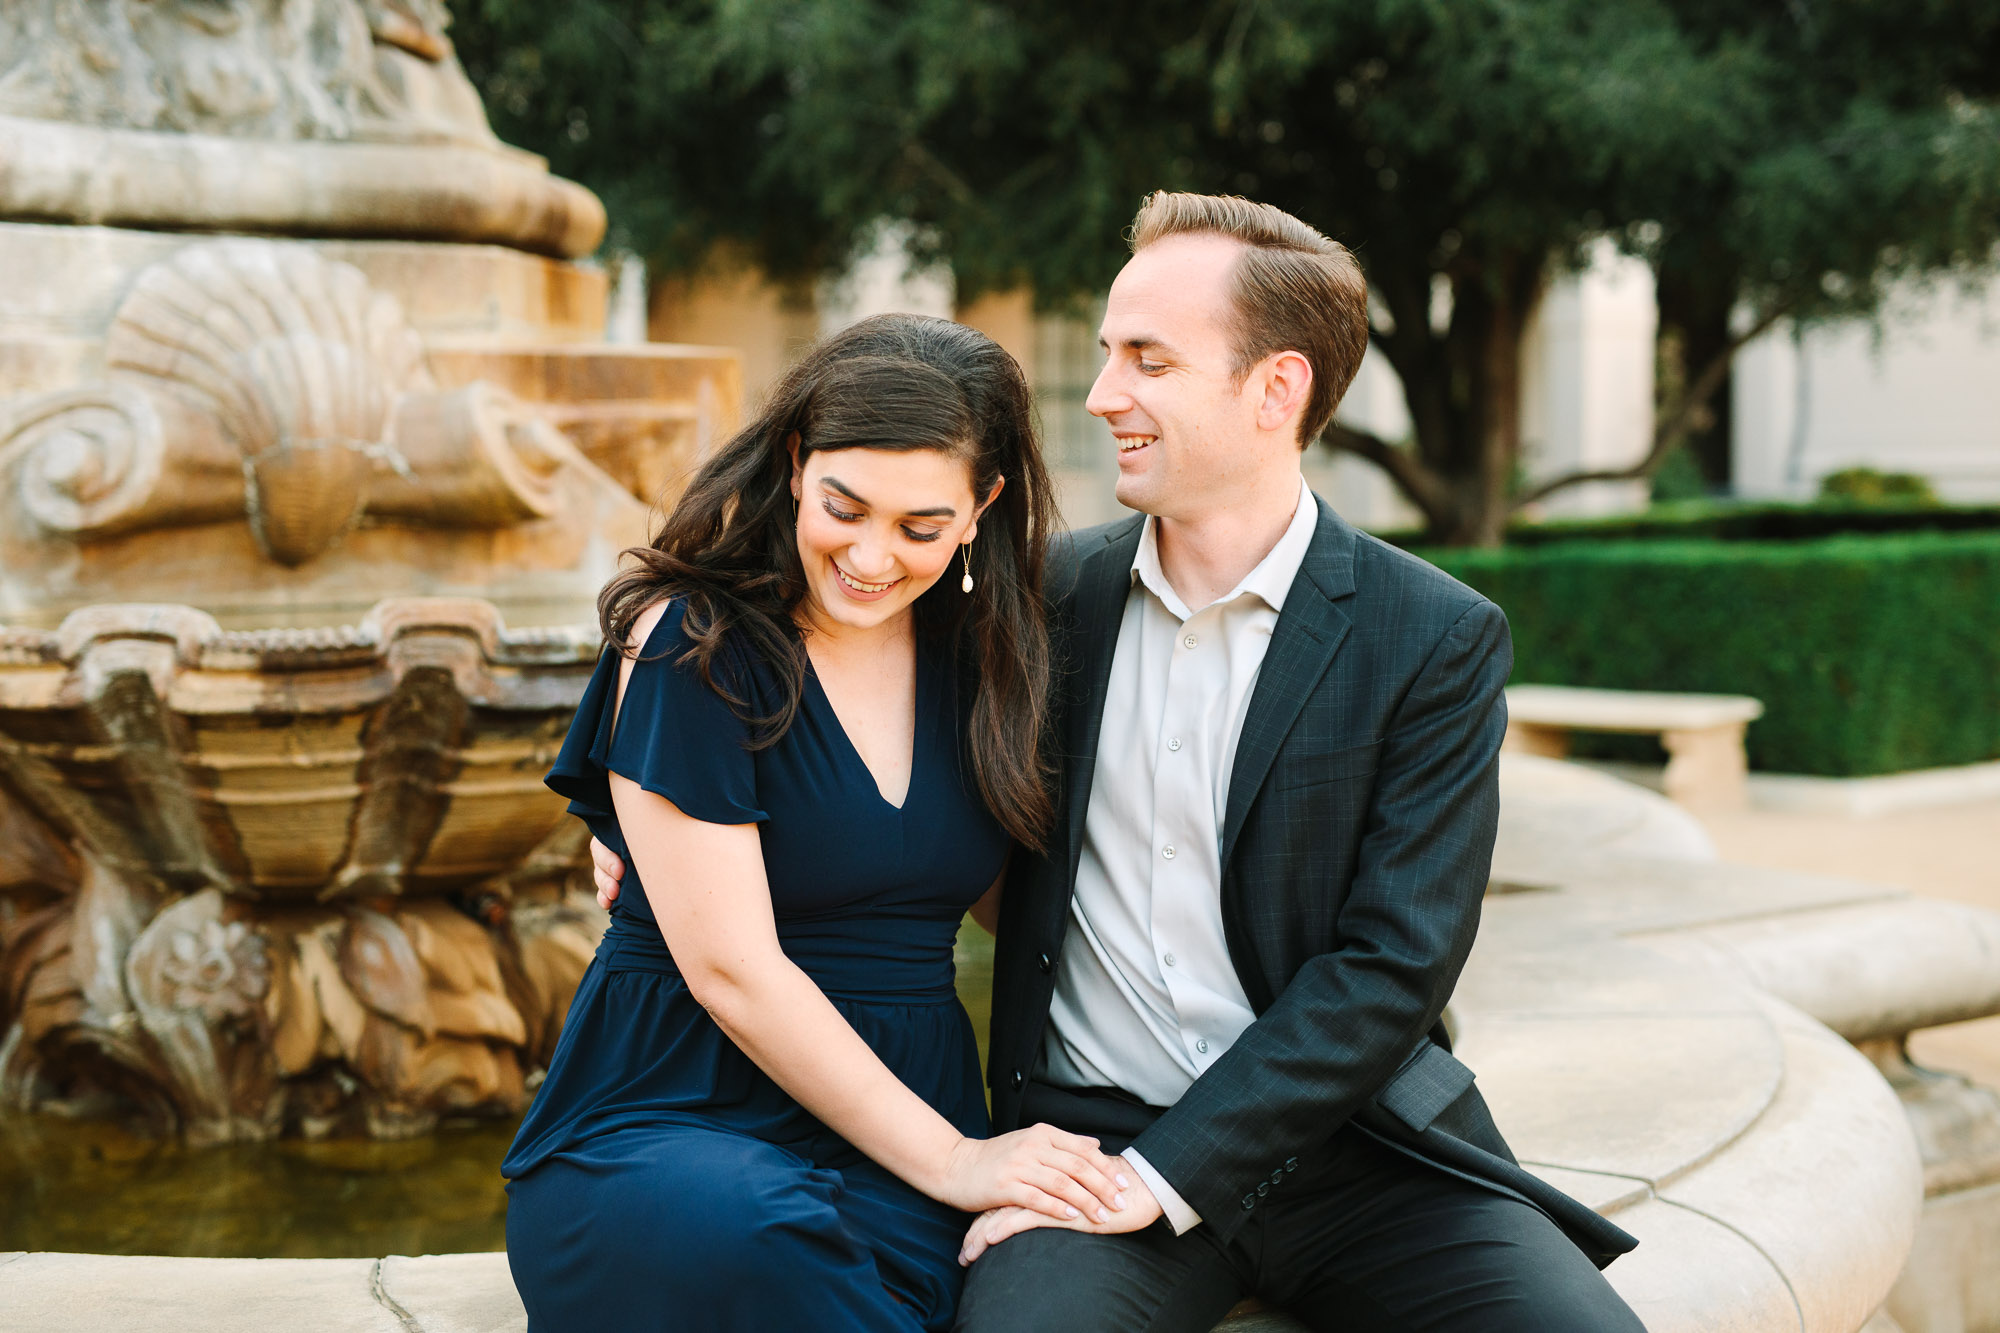 Pasadena engagement session by Mary Costa Photography